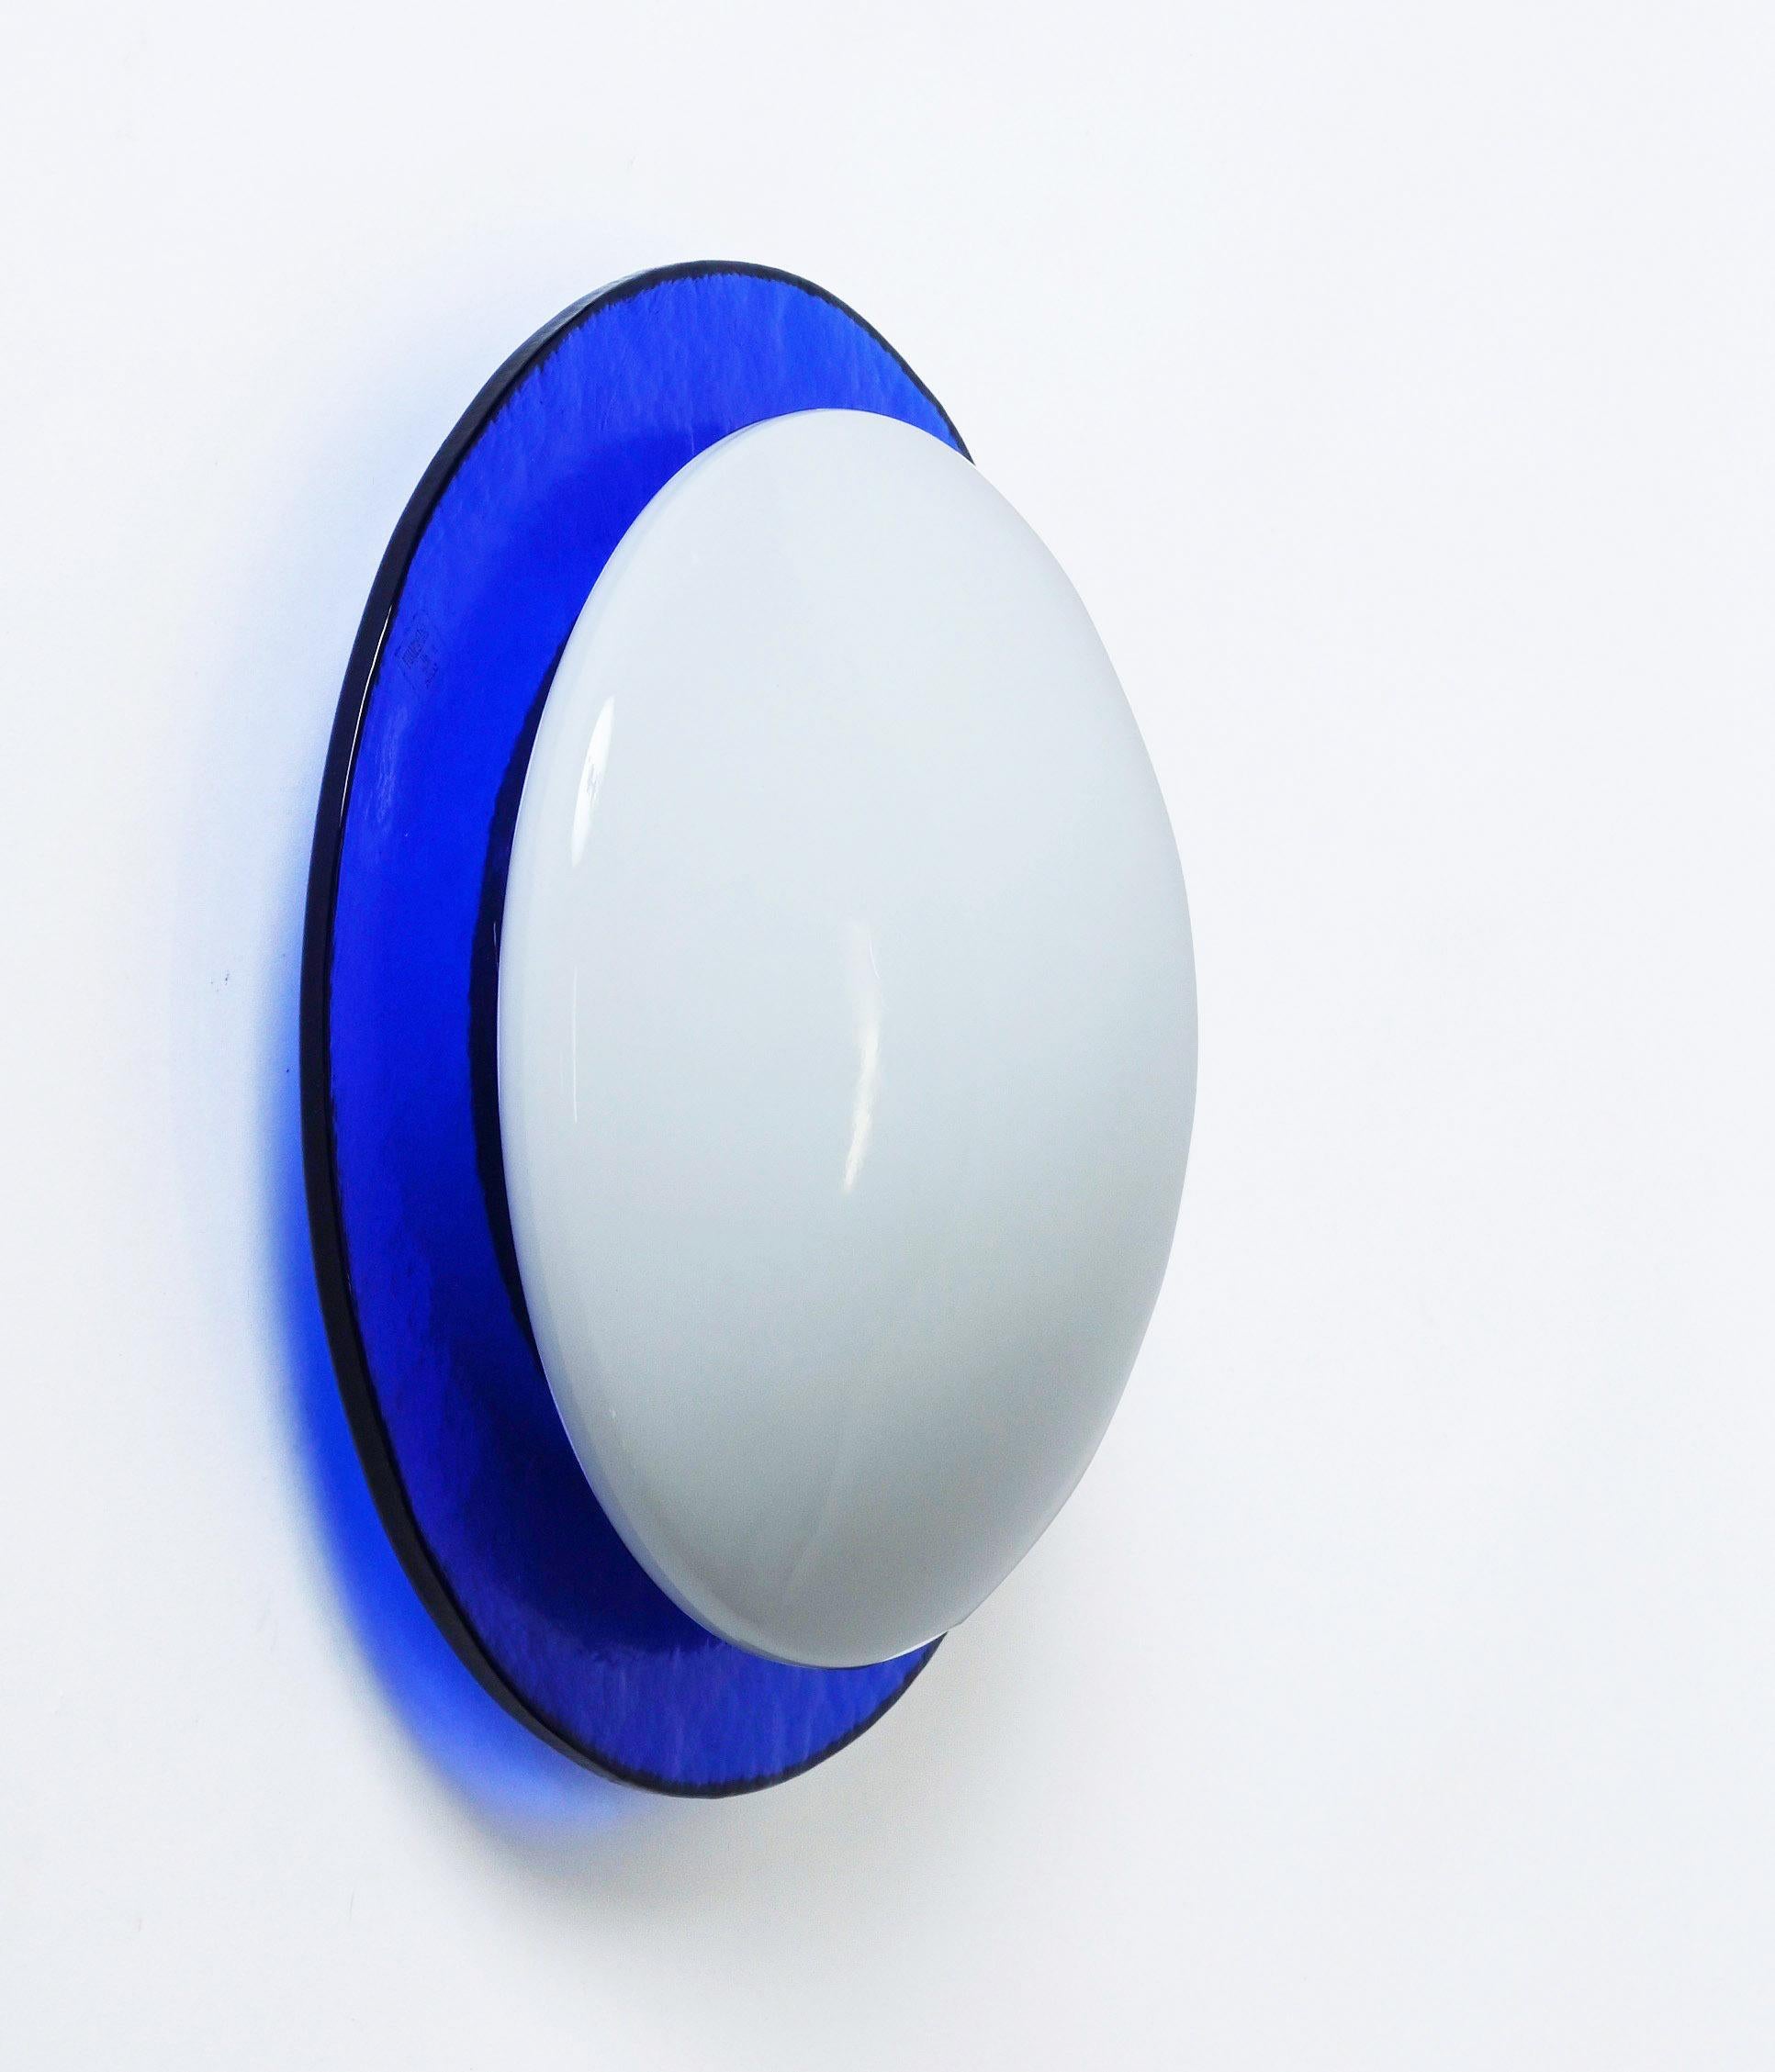 MIdcentury Vetri Murano Round Blue and White Artistic Glass Italian Sconce 1970s For Sale 4